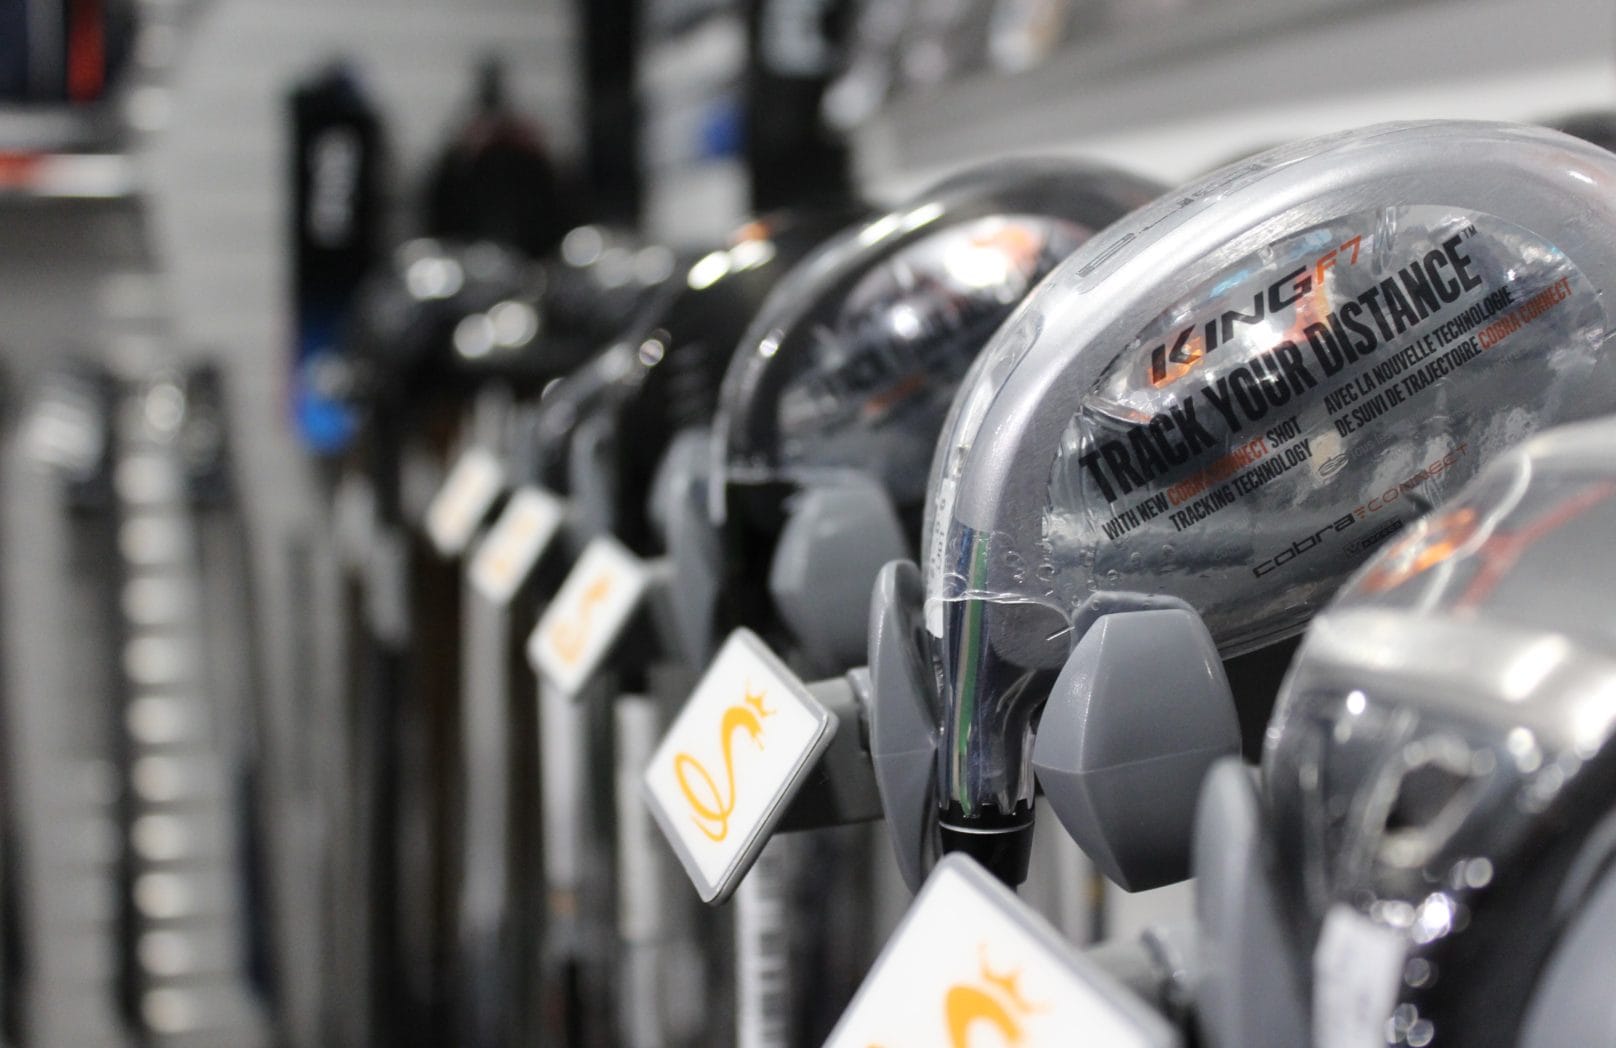 Golf clubs for sale in shop